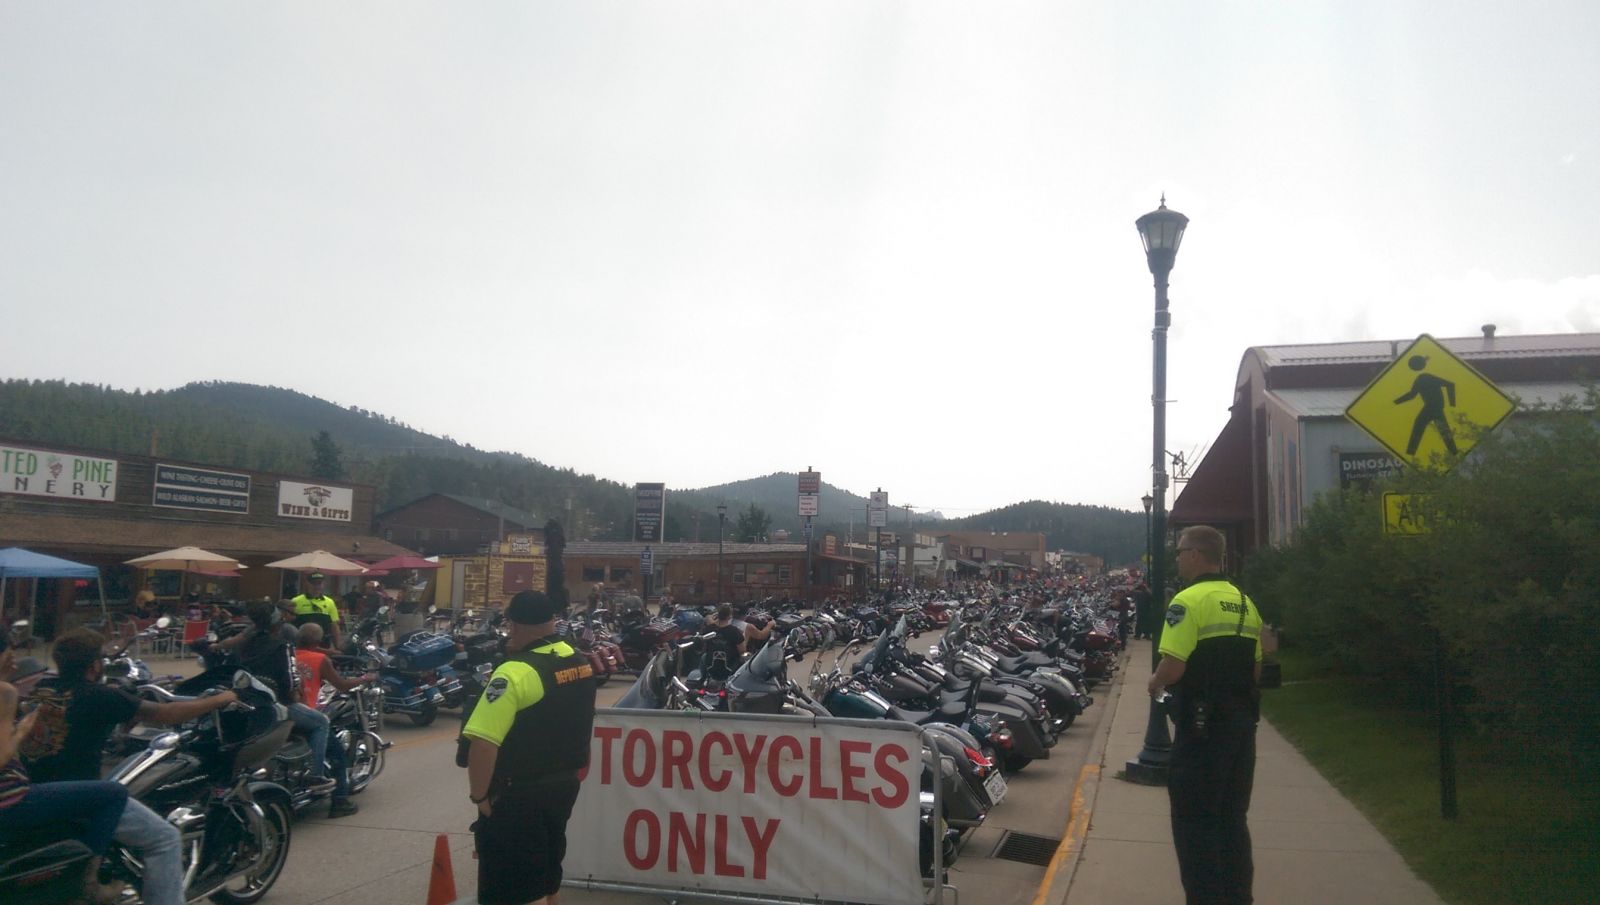 Downtown Hill City SD, I didn’t get any good pictures of DT Sturgis. 